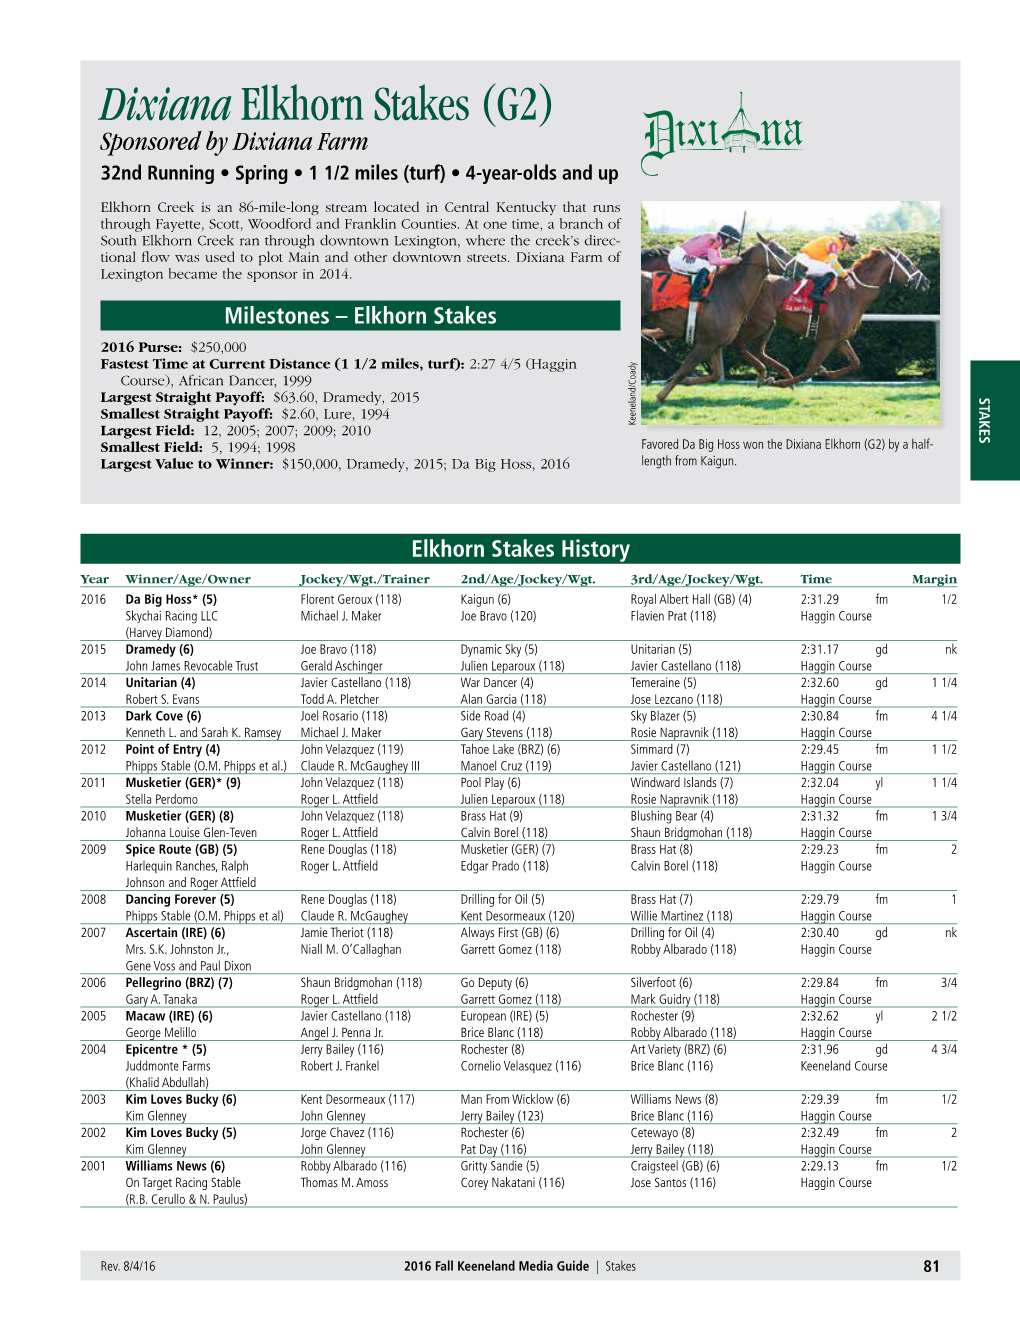 Dixiana Elkhorn Stakes (G2) Sponsored by Dixiana Farm 32Nd Running • Spring • 1 1/2 Miles (Turf) • 4-Year-Olds and Up